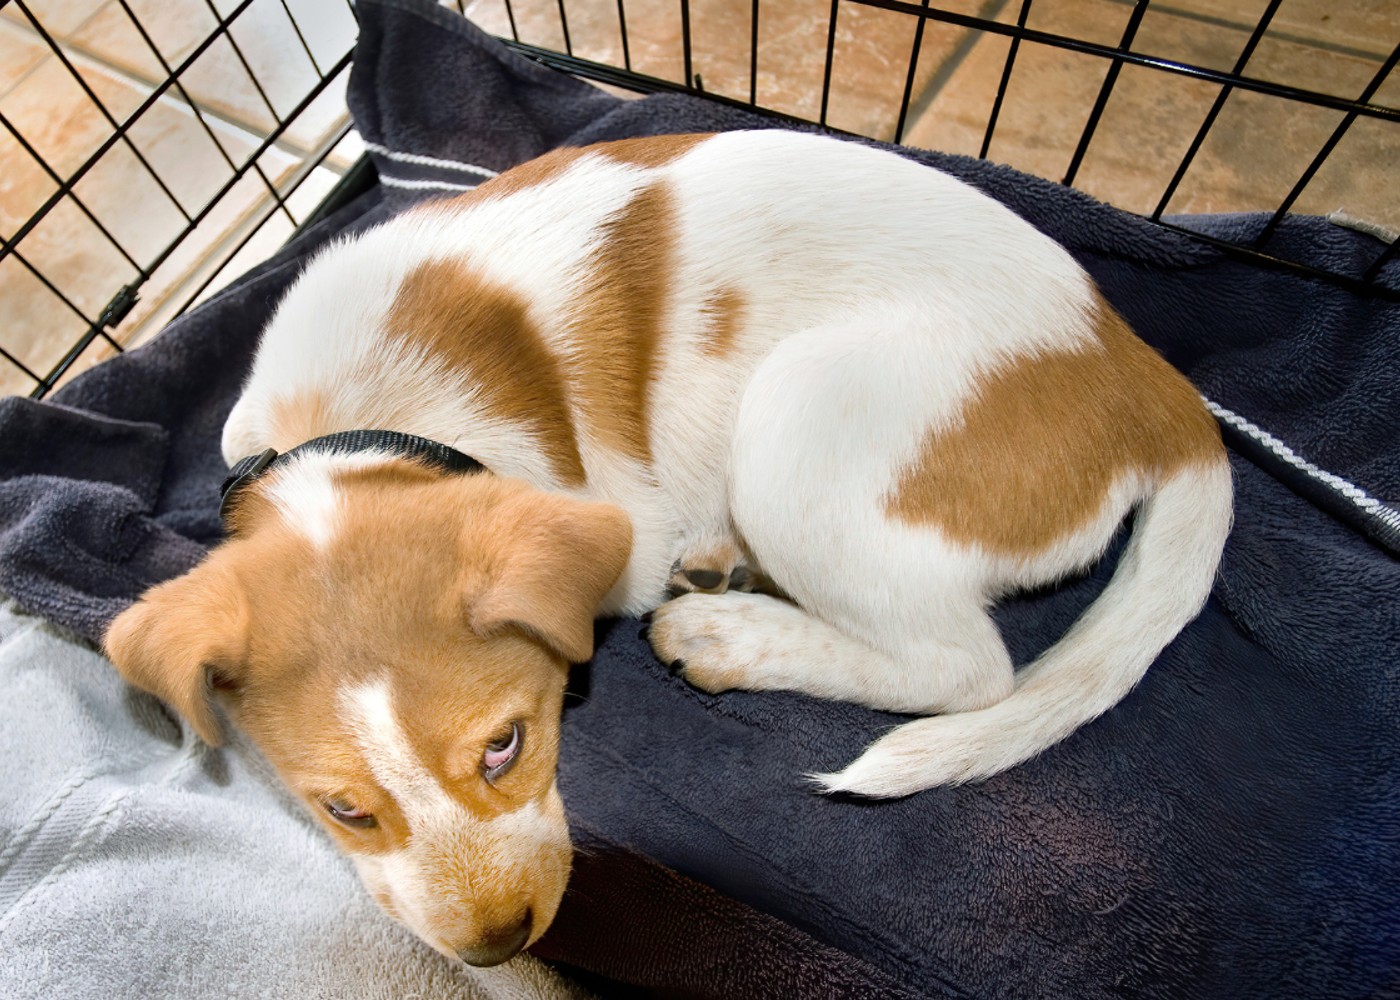 A dog snuggled up calmly in their crate after receiving crate training from Dog Training Elite of Southwest Florida.